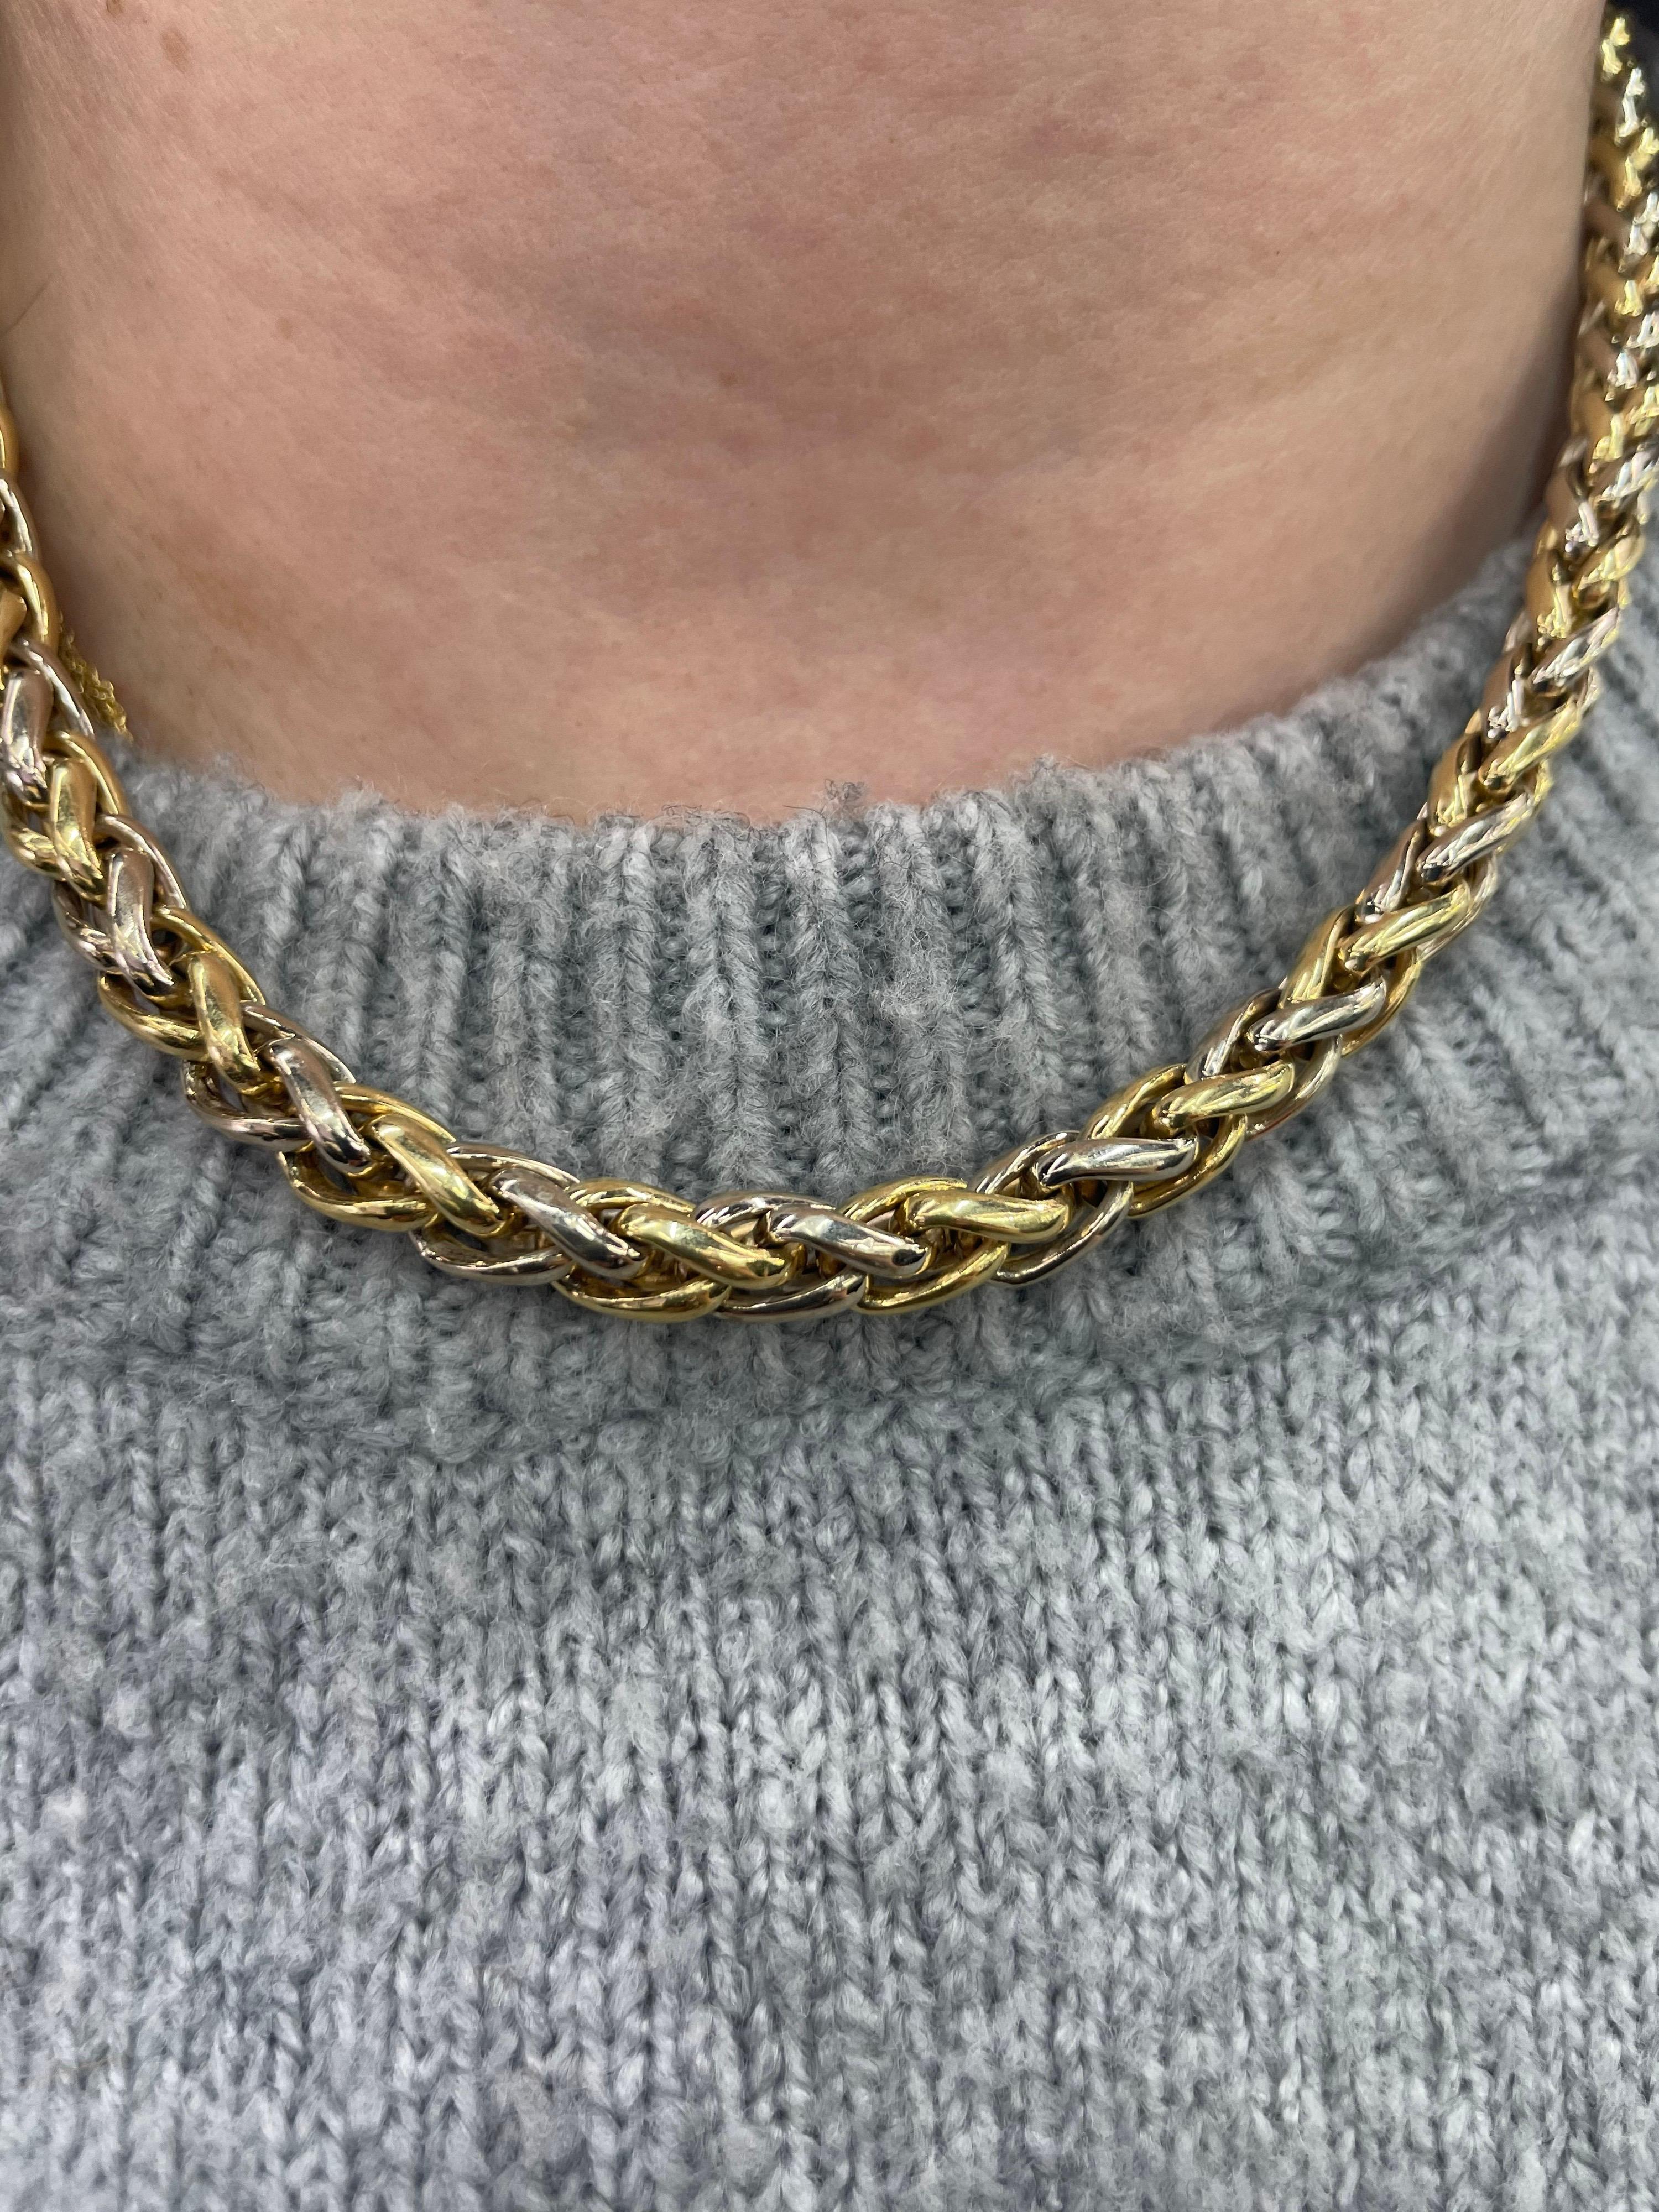 Two-Tone Braided Necklace 14 Karat Gold 37.5 Grams  In Excellent Condition For Sale In New York, NY